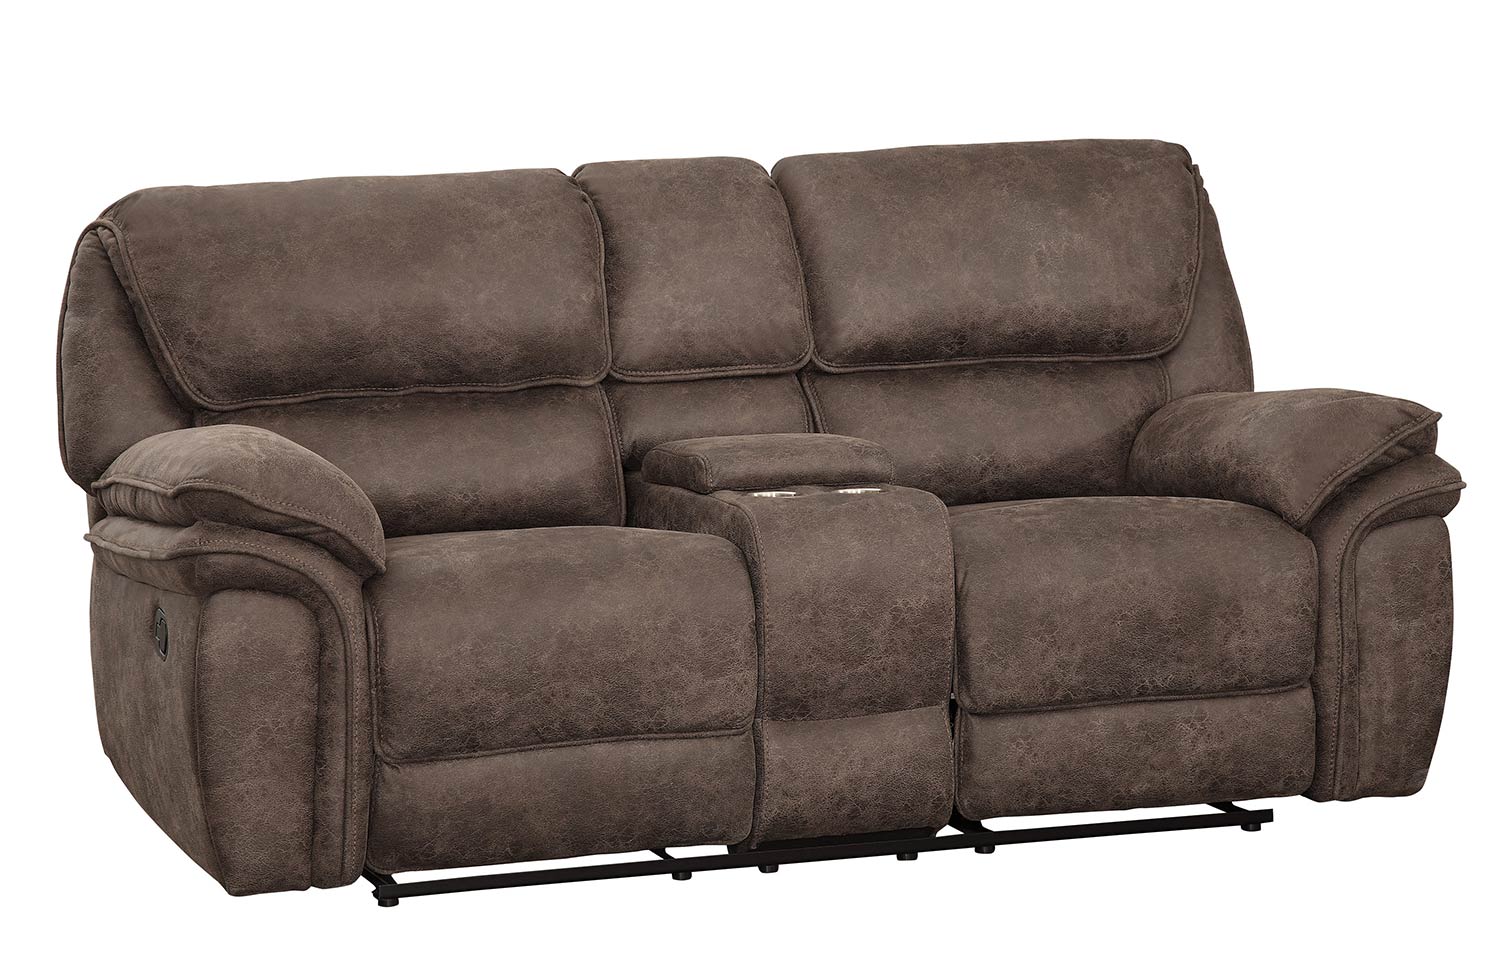 Homelegance Hadden Power Double Reclining Love Seat With Center Console - Dark Brown